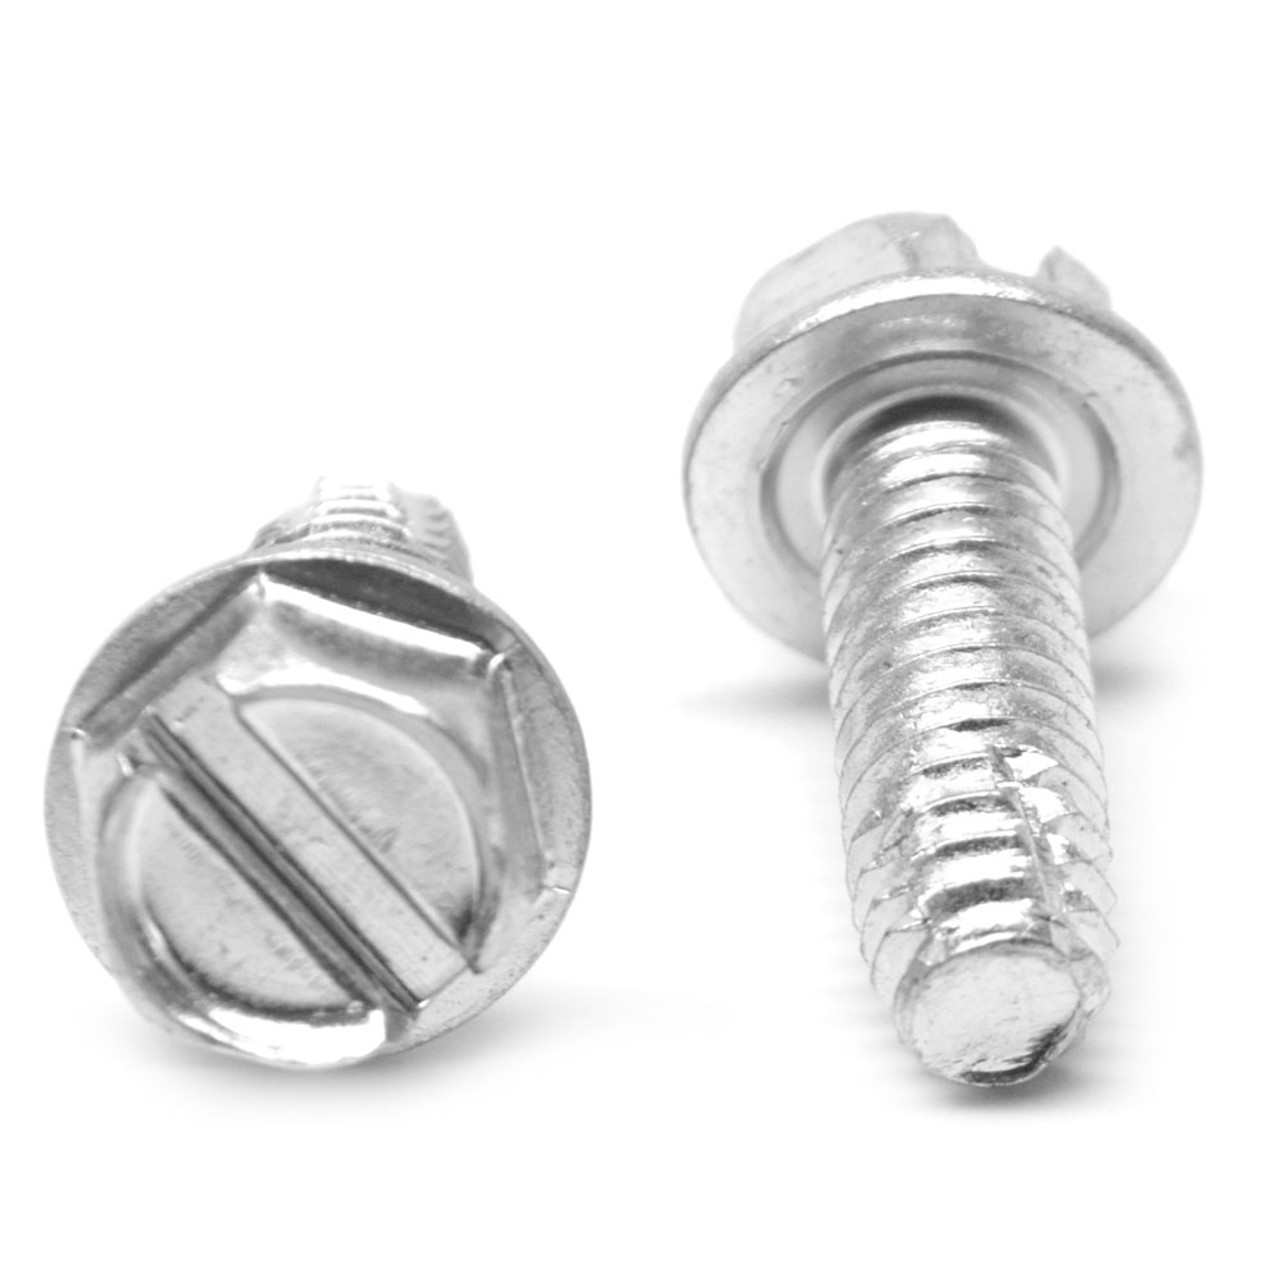 1/4-20 x 1/4 Coarse Thread Thread Cutting Screw Slotted Hex Washer Head Type F Low Carbon Steel Zinc Plated